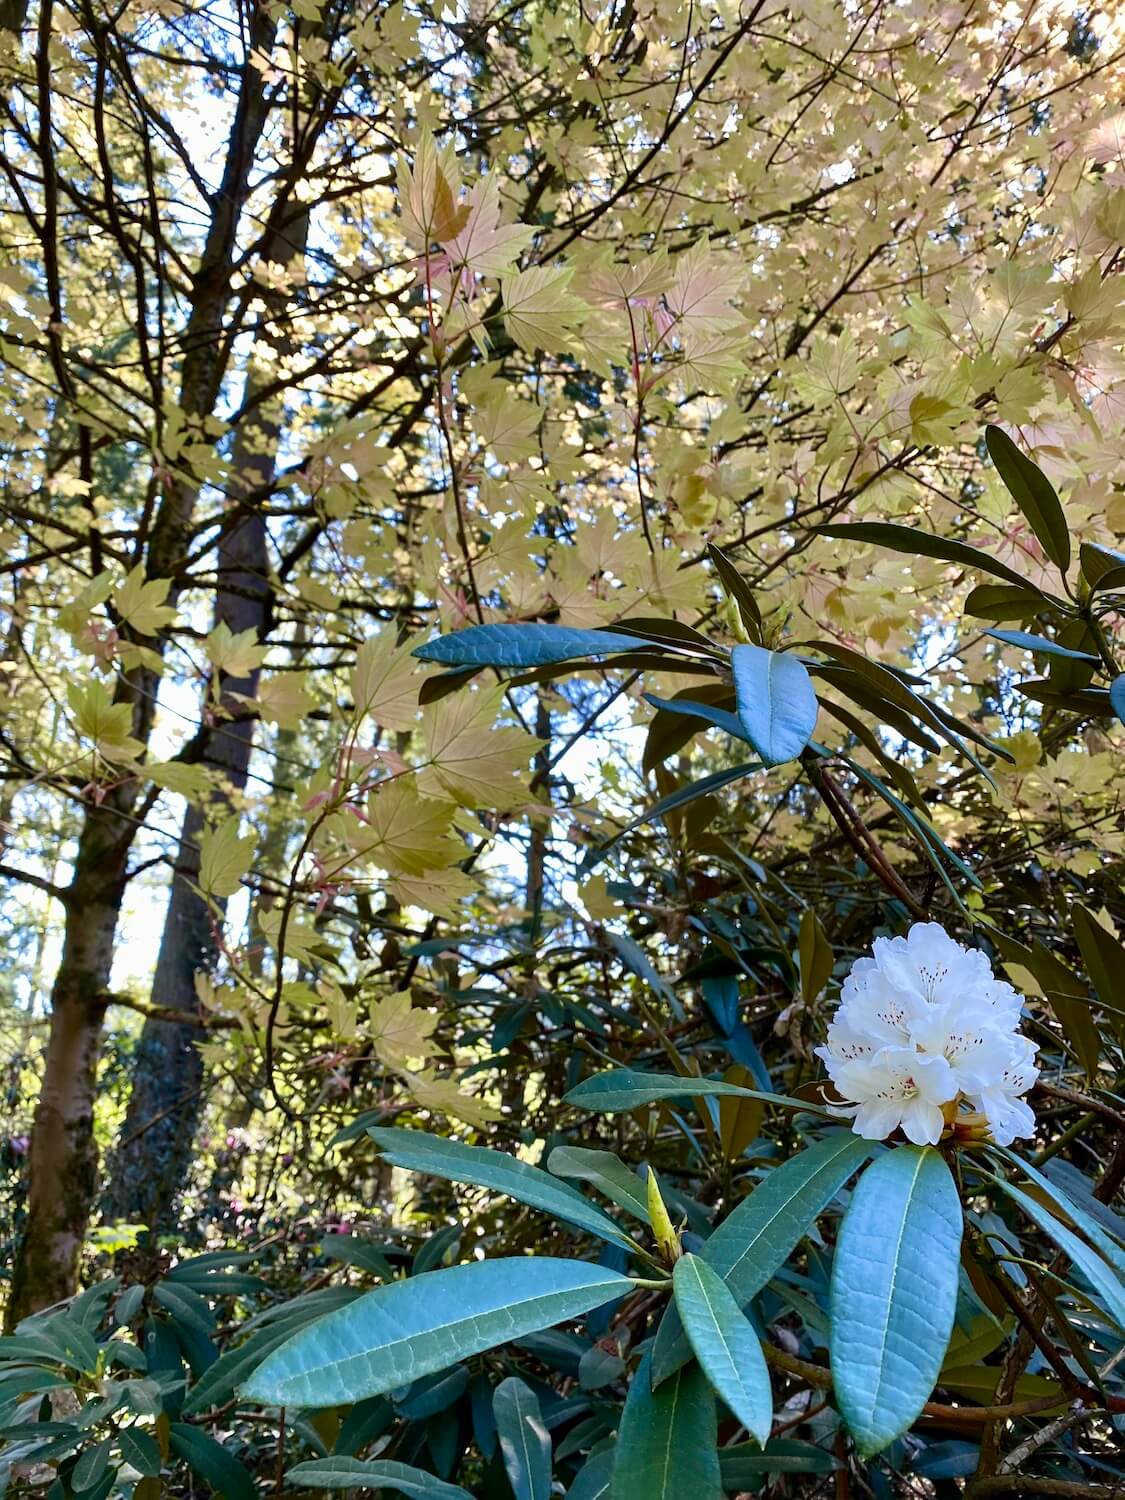 The Rhododendron Species Botanical Garden is amongst a wooded areas that includes the maple trees featured in this photo, still pushing out fresh light yellow leaves.  